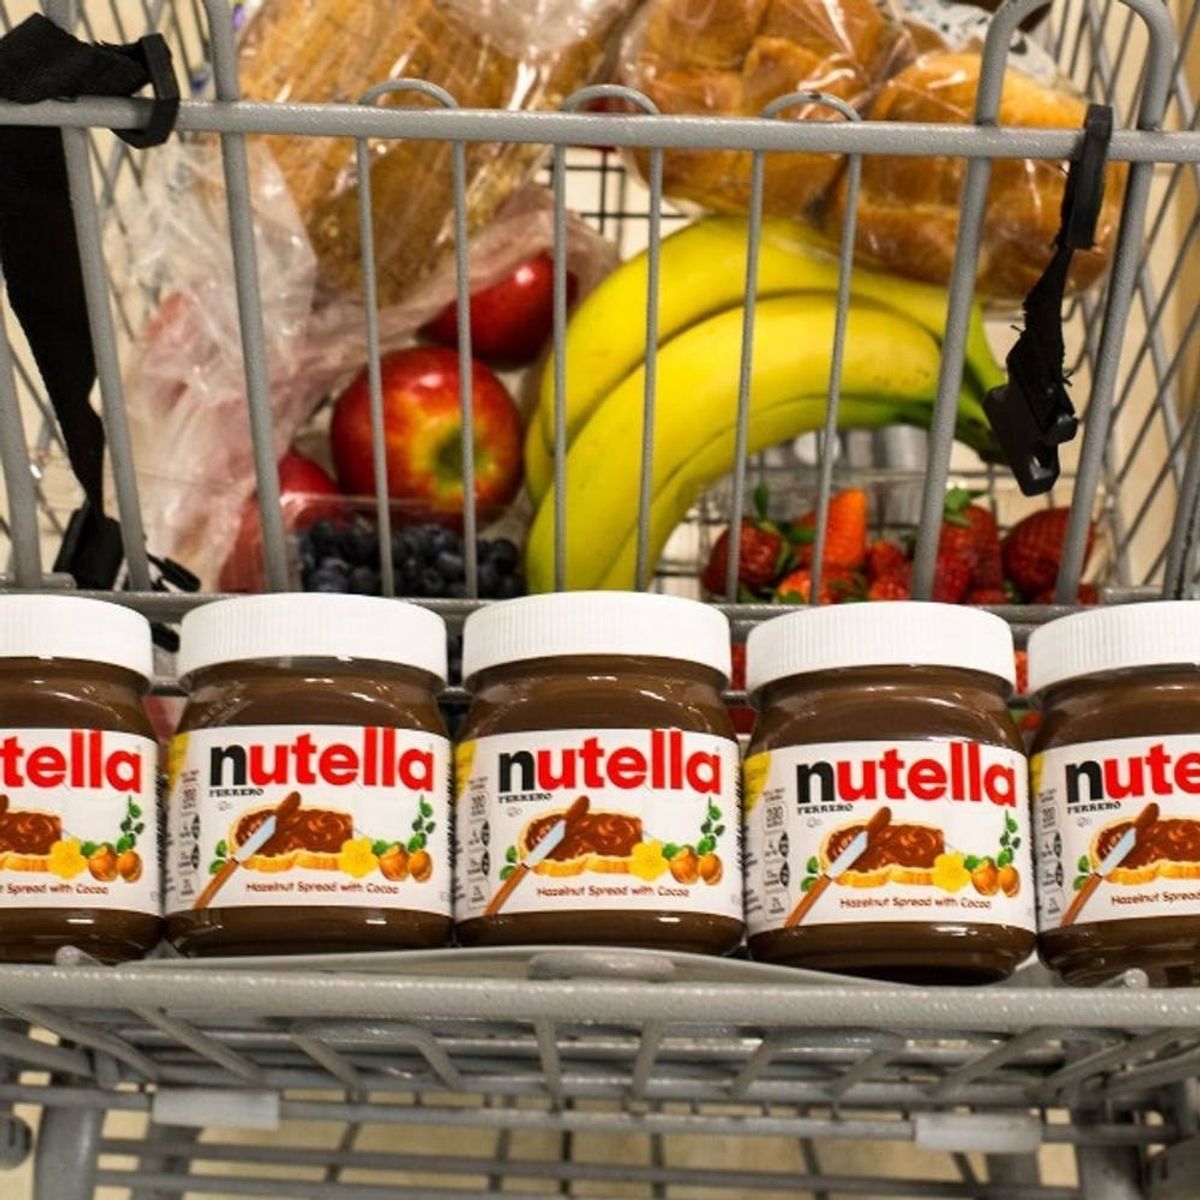 Nutella May Be Linked to Cancer and People Are Completely Losing It